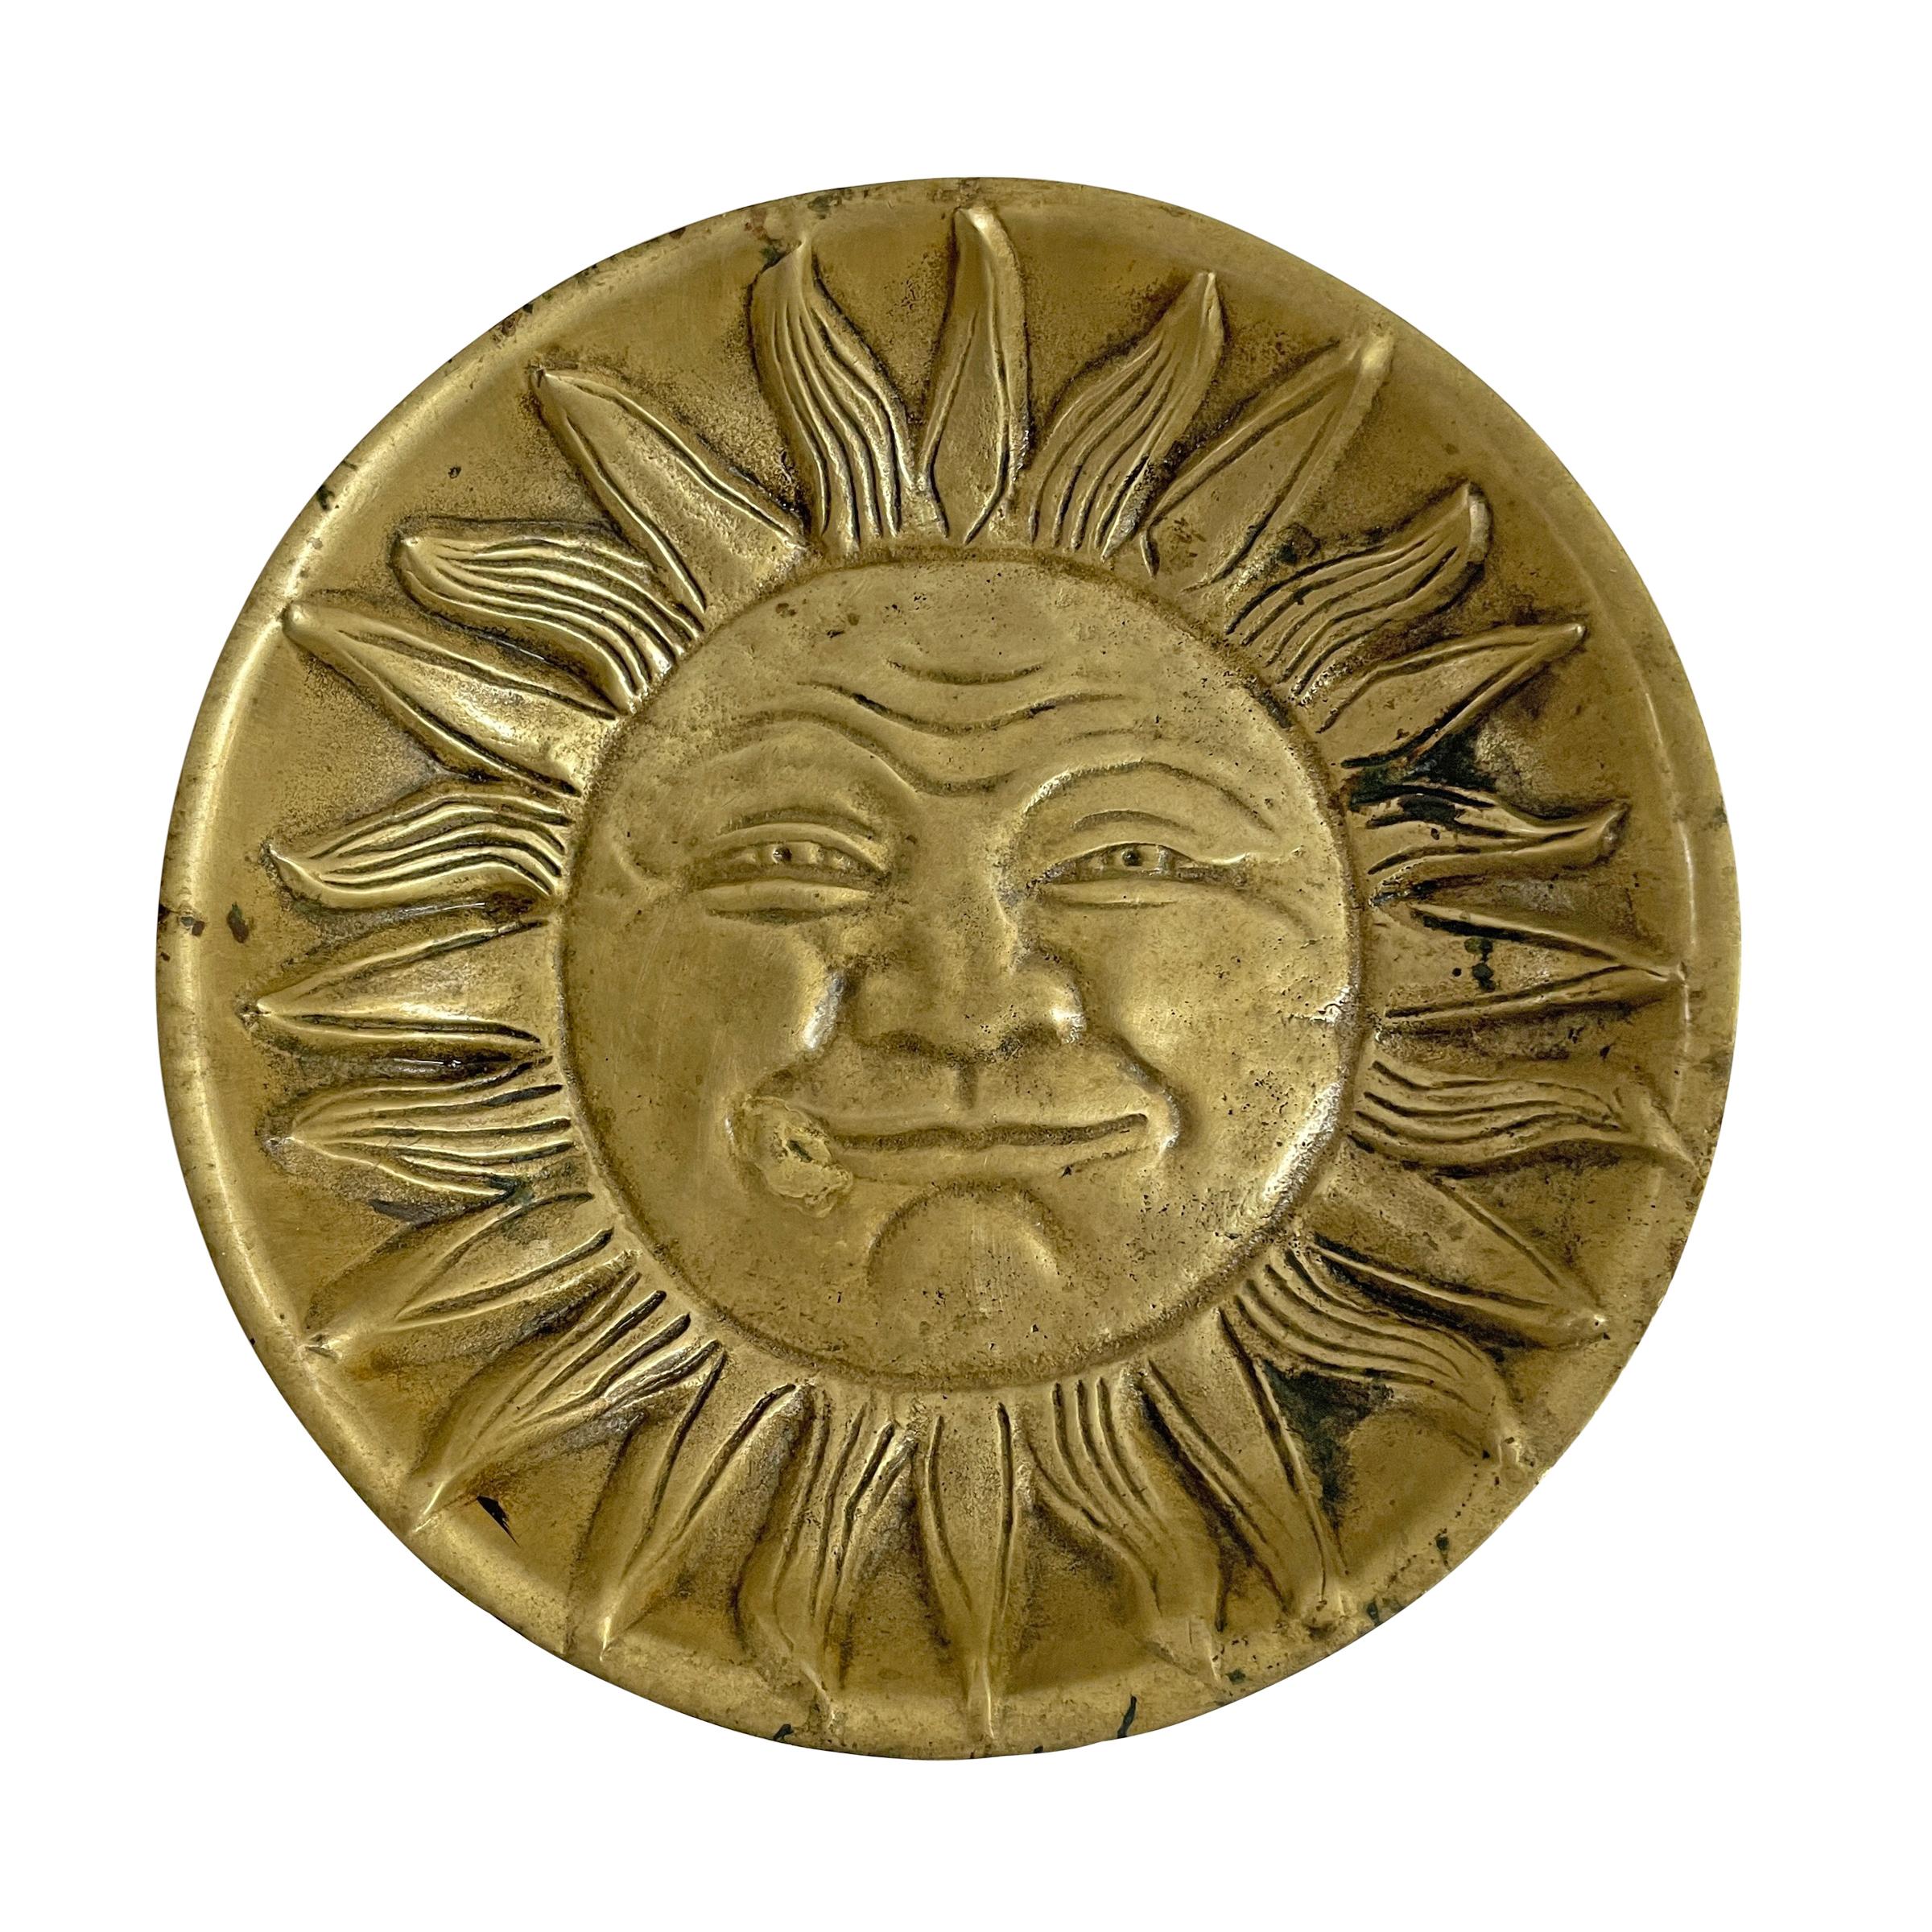 A charming 20th century cast bronze catchall with a large smirking sun face in the bottom. This piece is incredibly heavy for its size, and of the best quality casting! Perfect for holding your keys, pocket change, or any vices you may have.